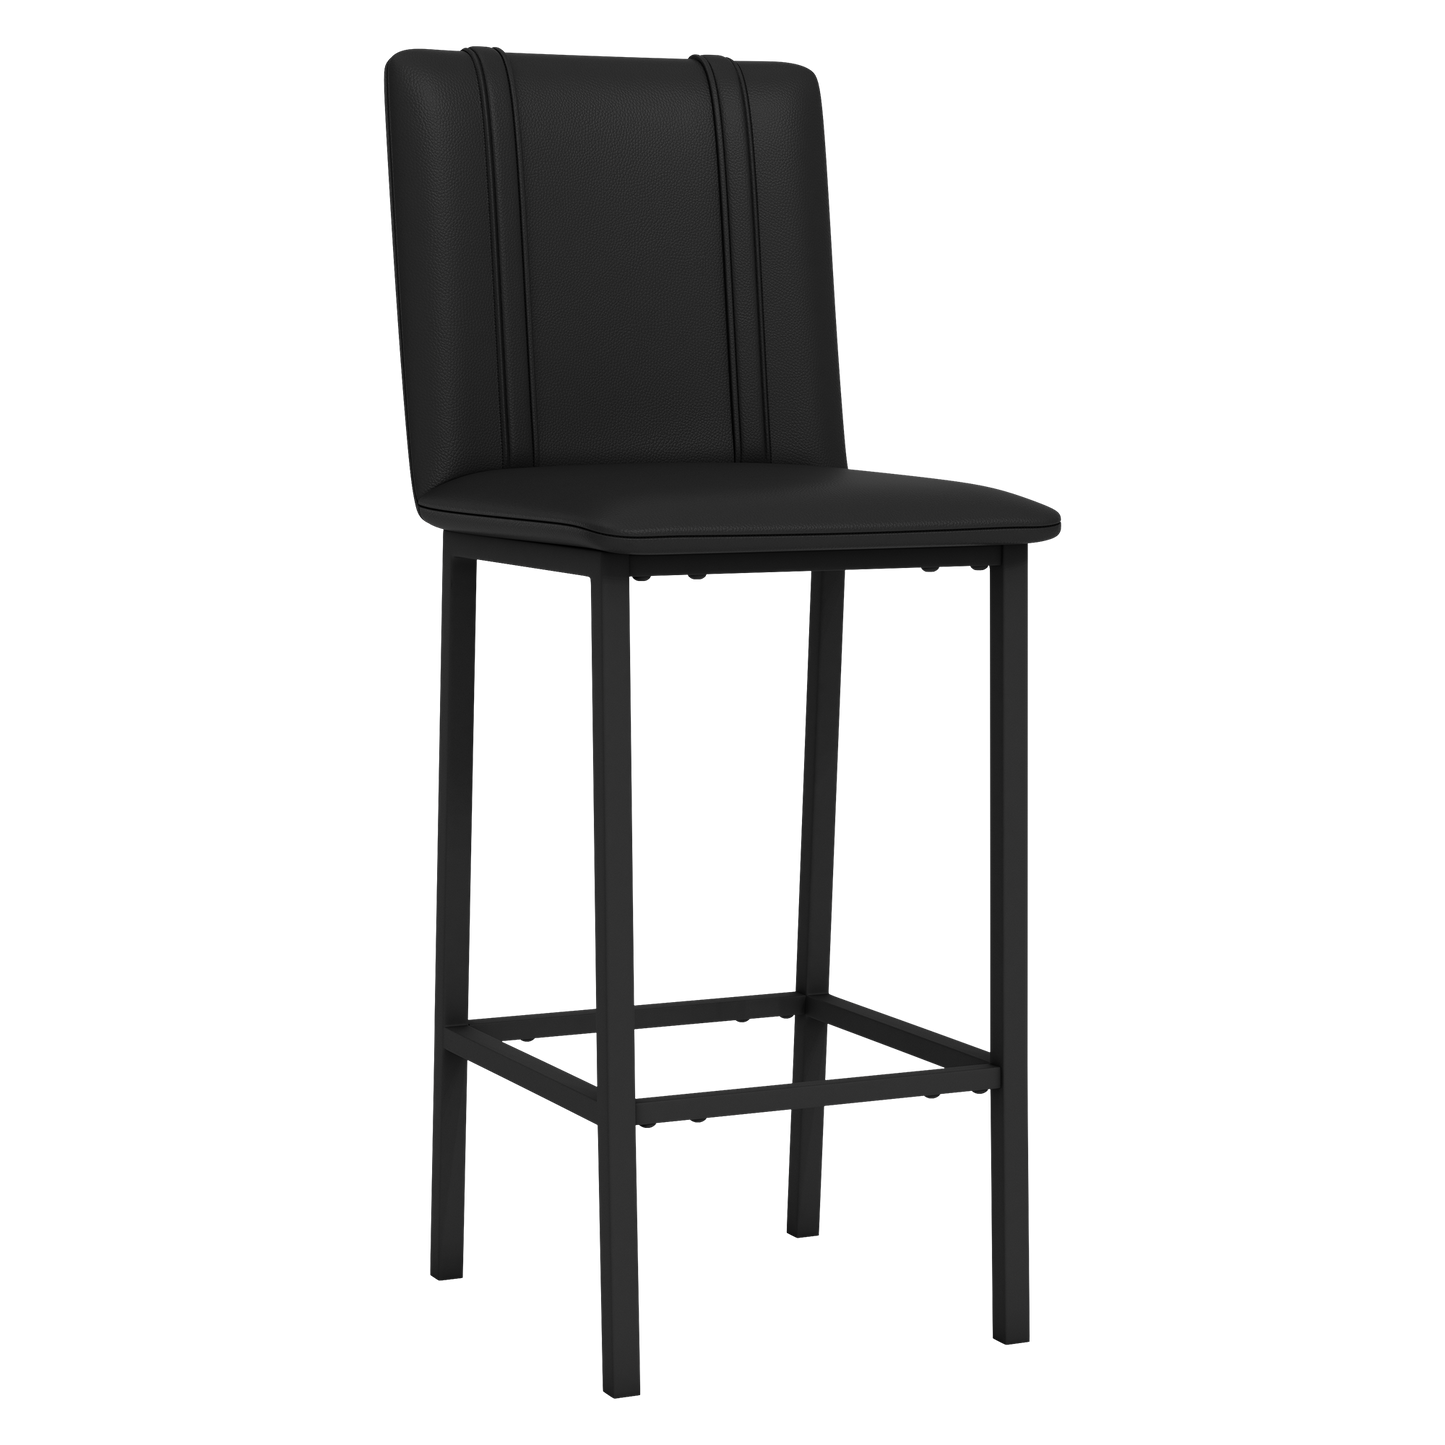 Bar Stool 500 with New Jersey Devils Logo Set of 2